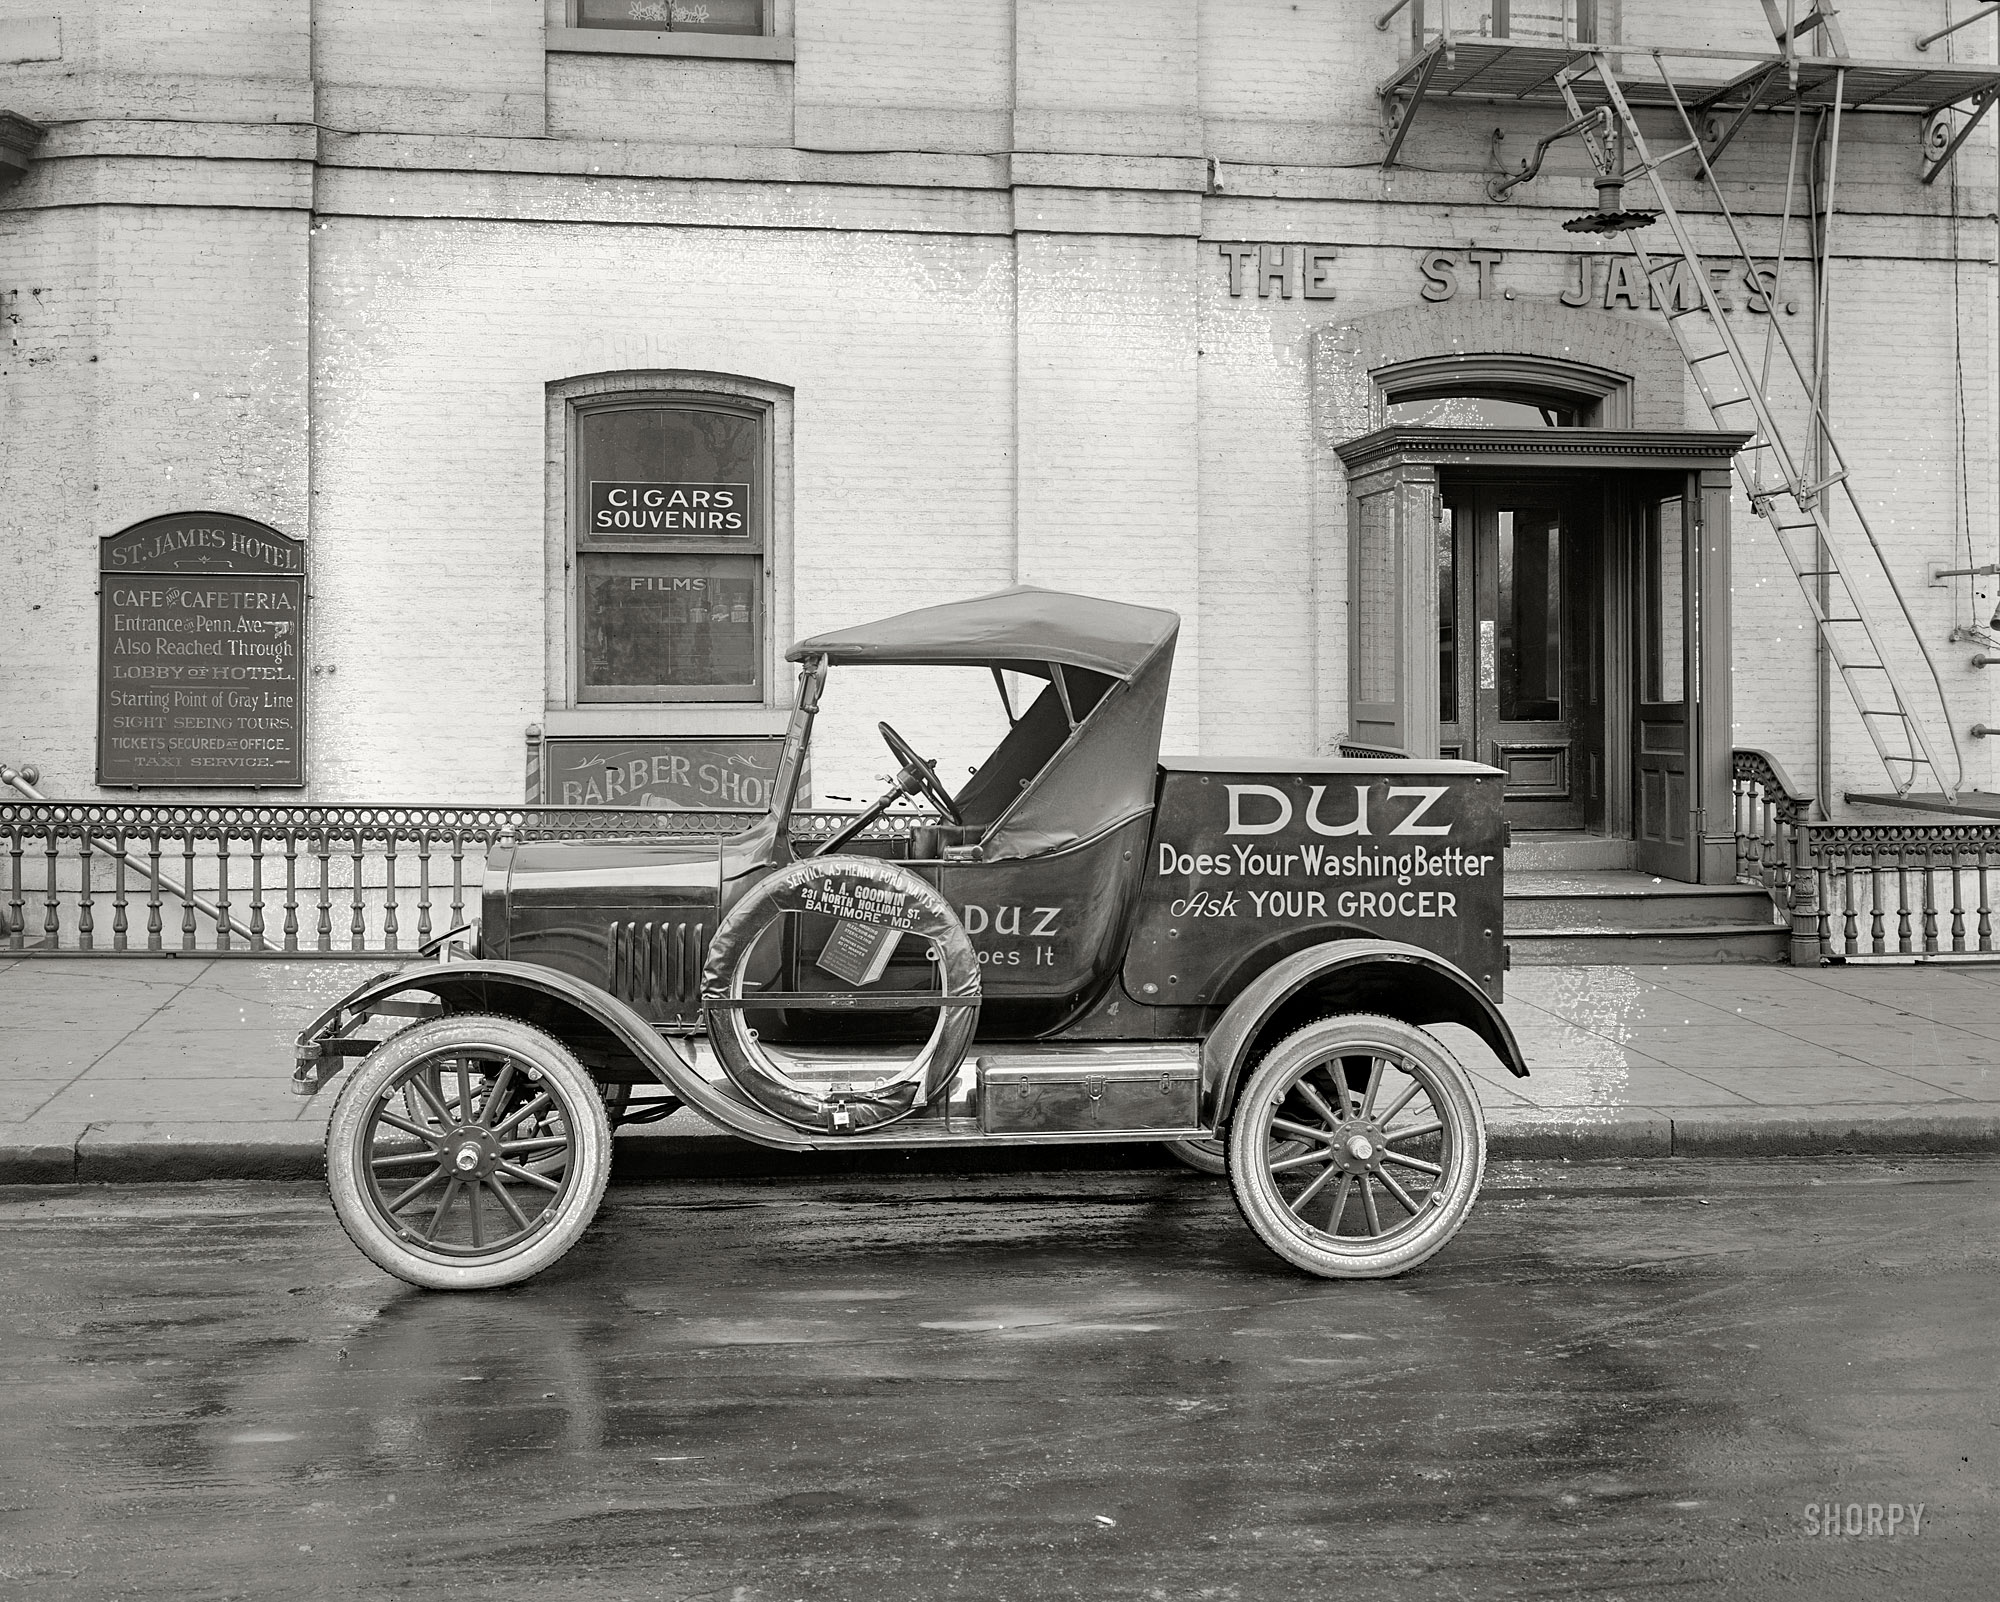 Washington, D.C., circa 1925. "Ford Motor Co. -- Duz delivery car at St. James Hotel." National Photo Company glass negative. View full size.